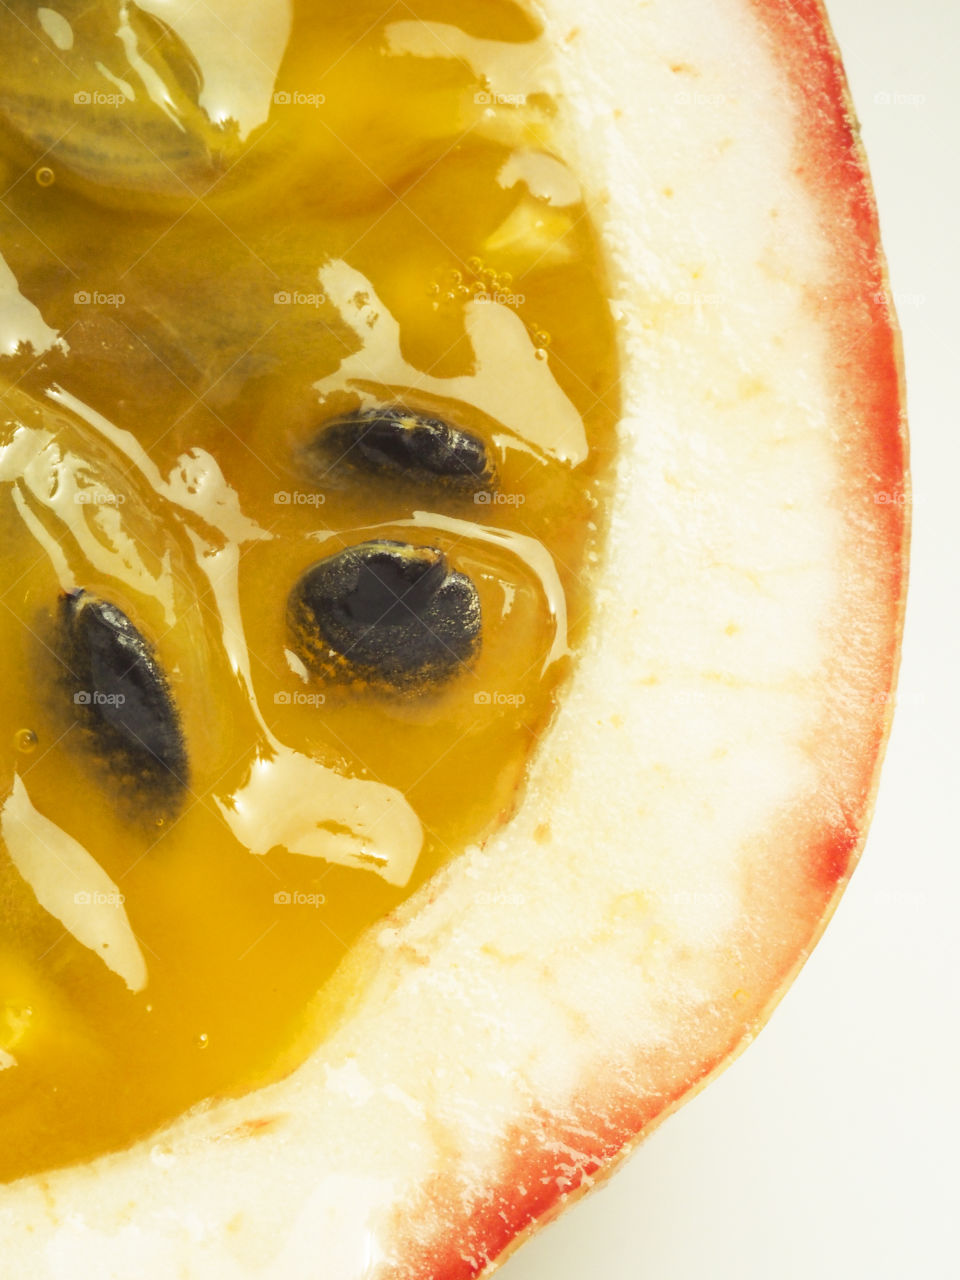 Extreme close-up of passion fruit